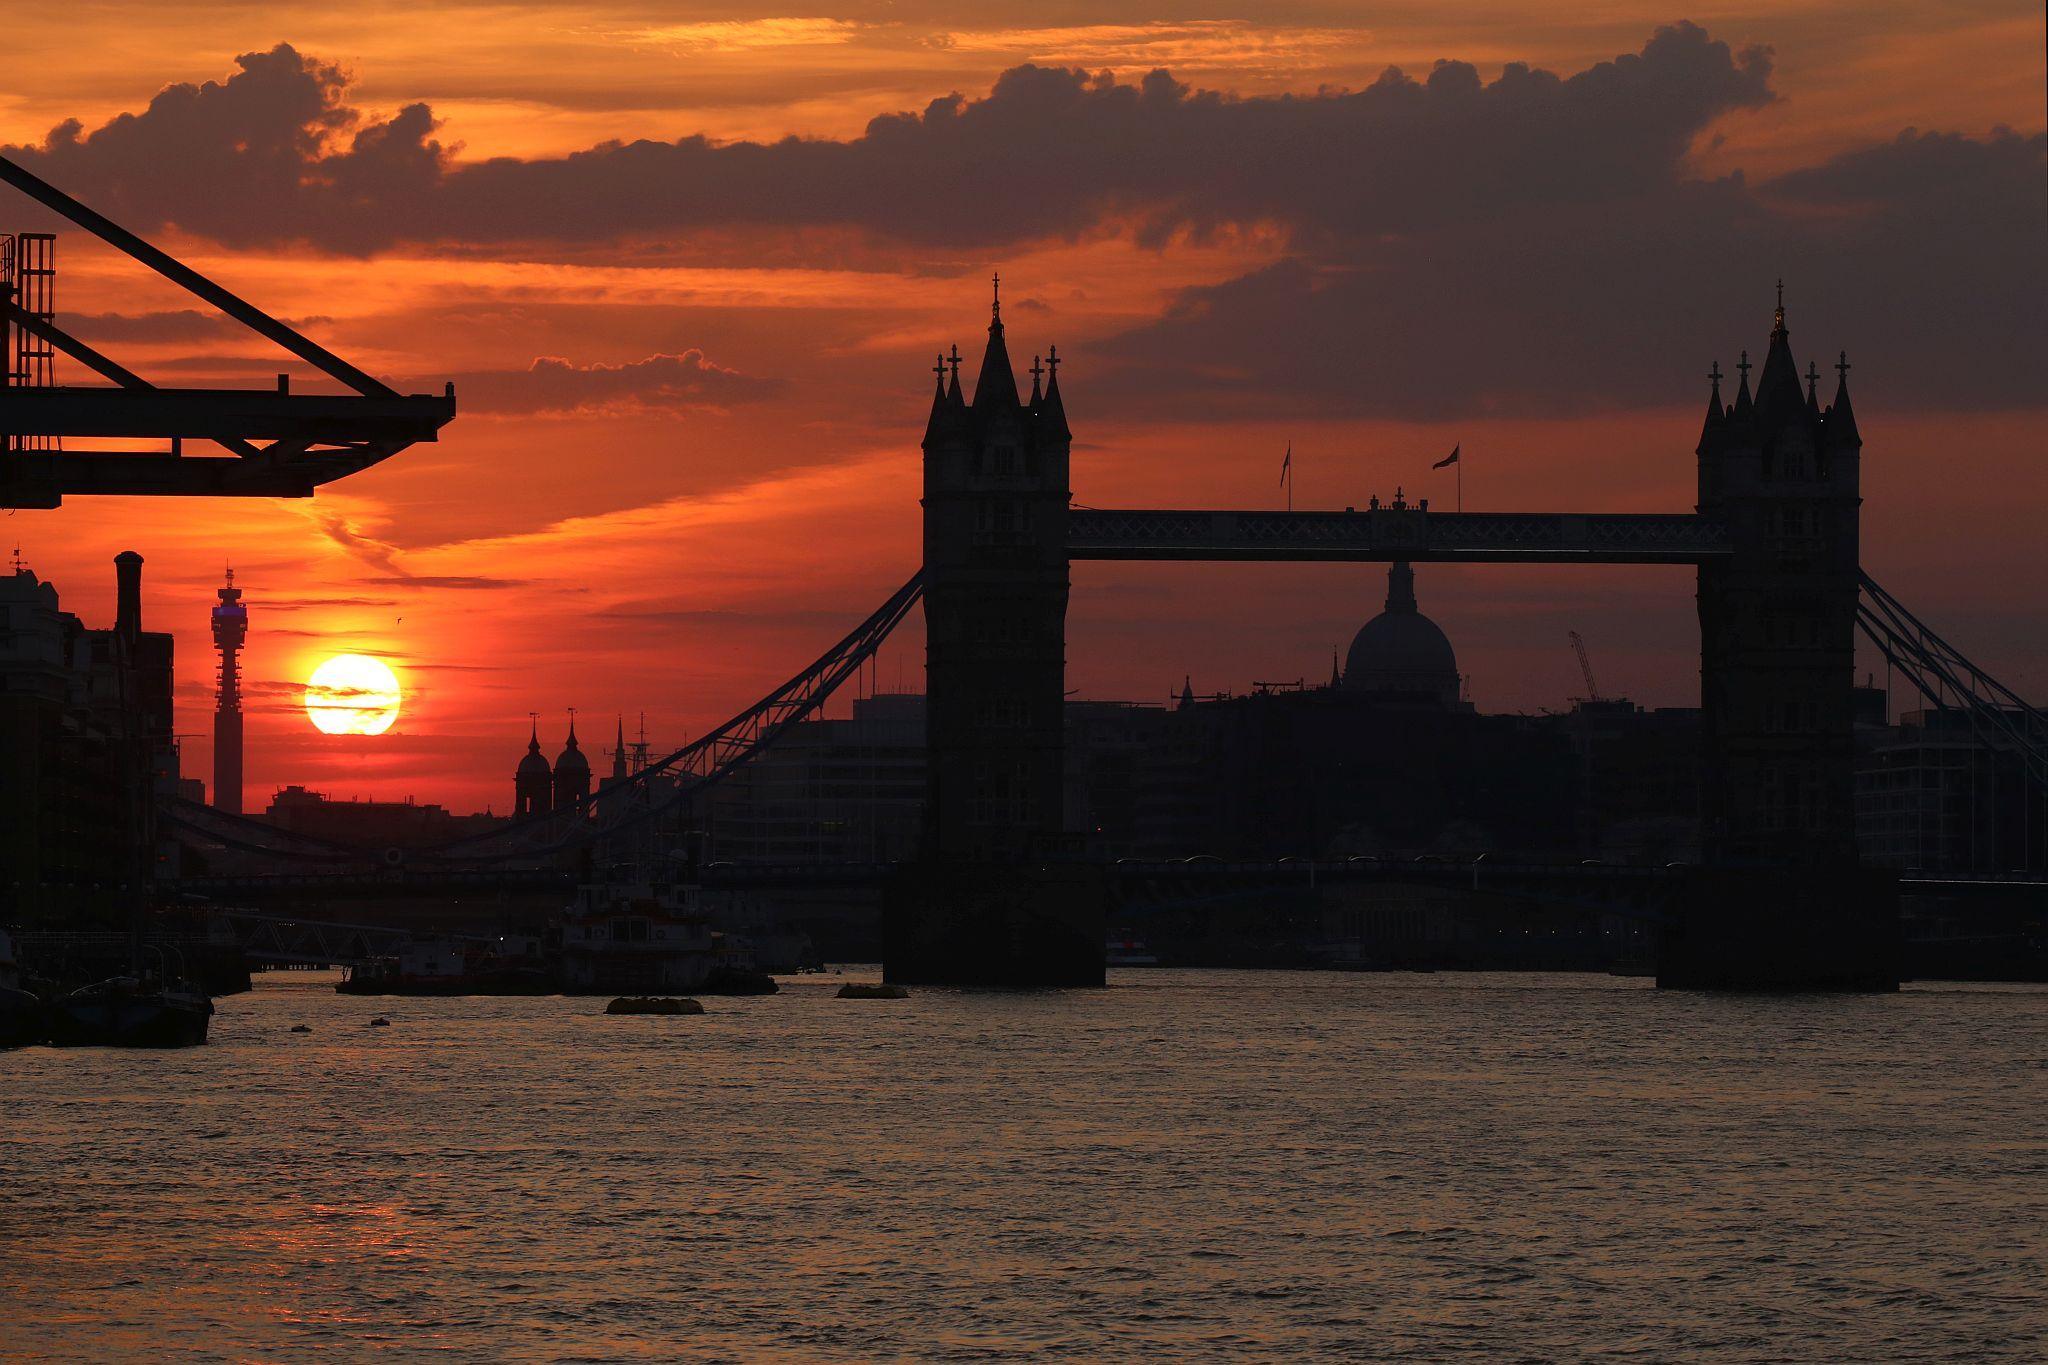 Tower Bridge, on the River Thames in London, at sunset. 09-Aug-2020.